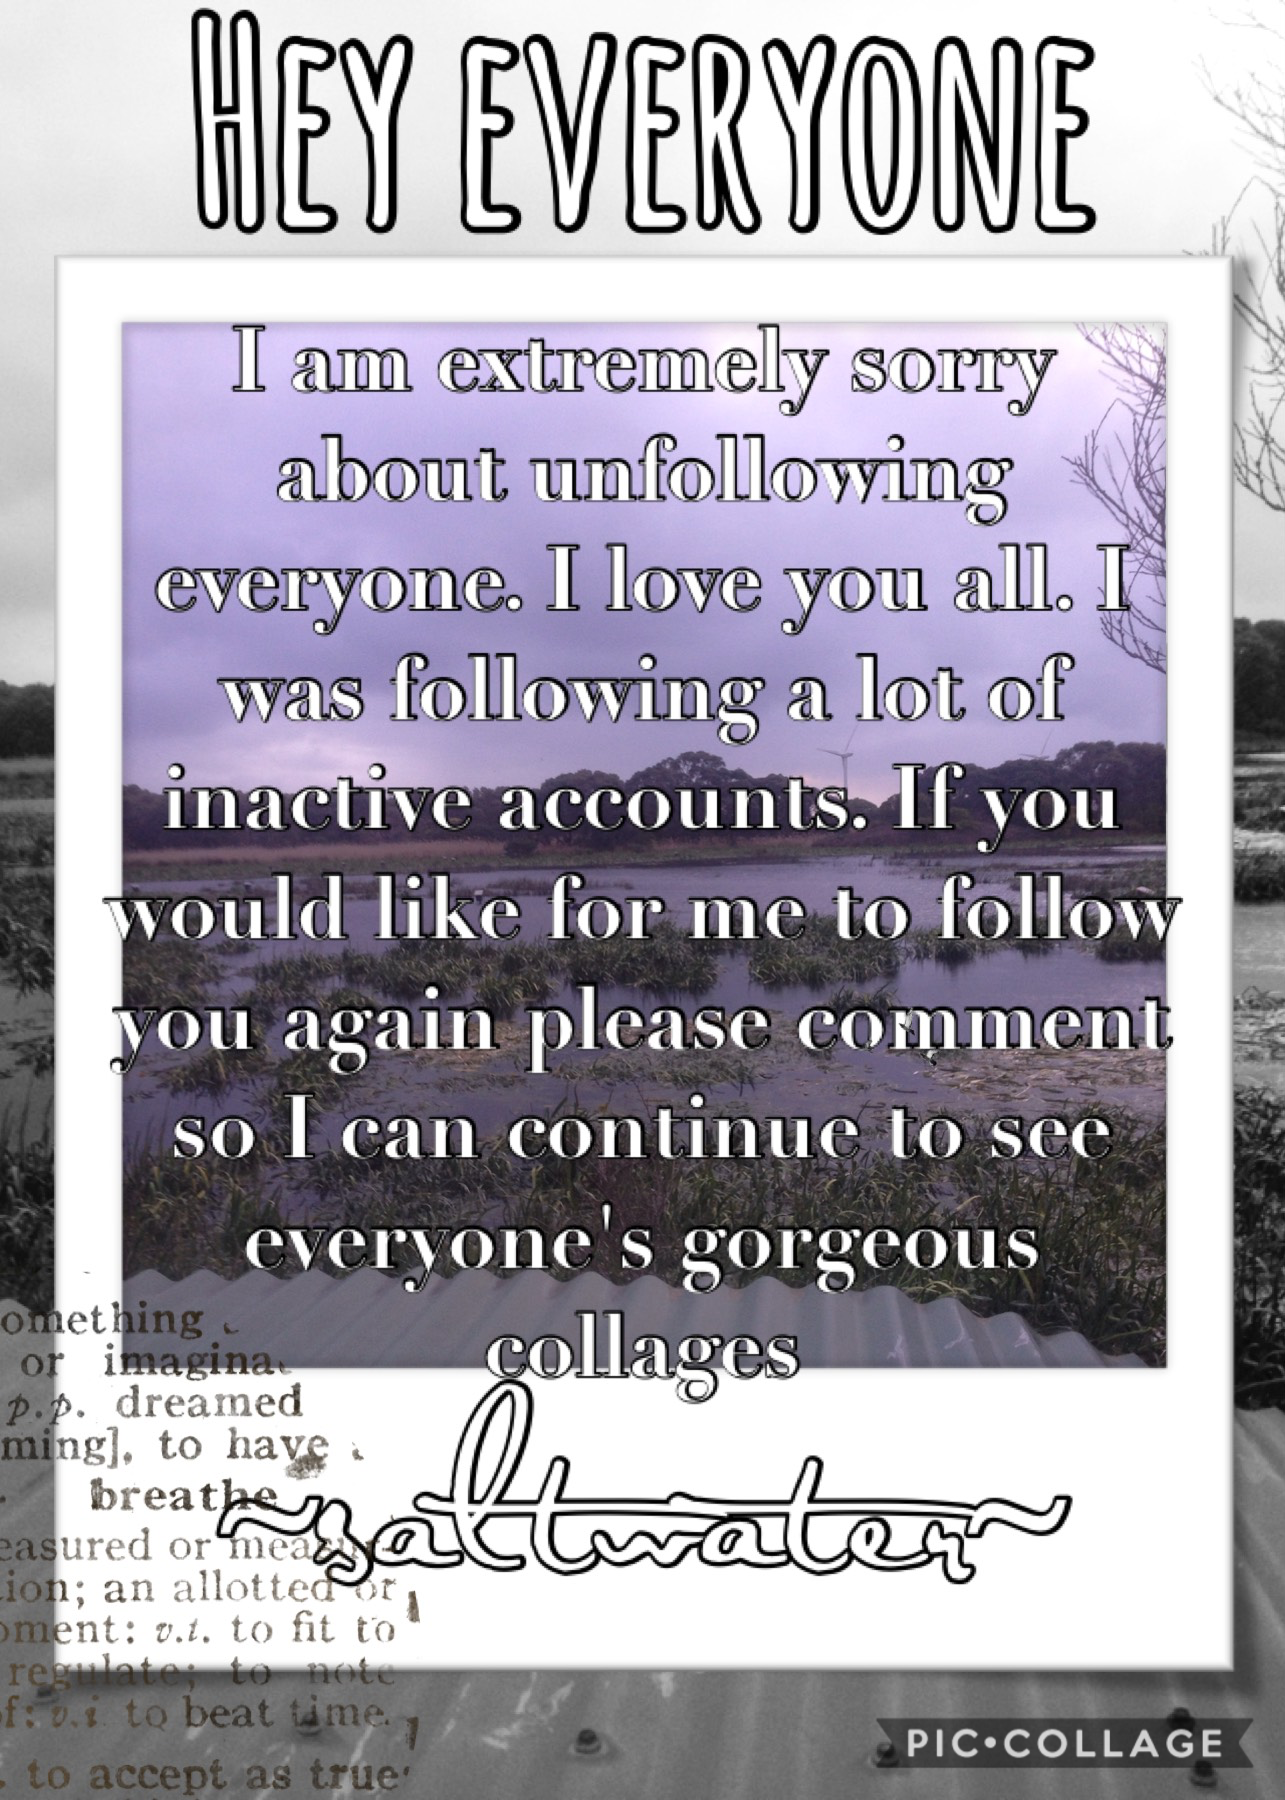 I'm really sorry everyone. If I haven't already followed you again then please comment. I love you all❤️